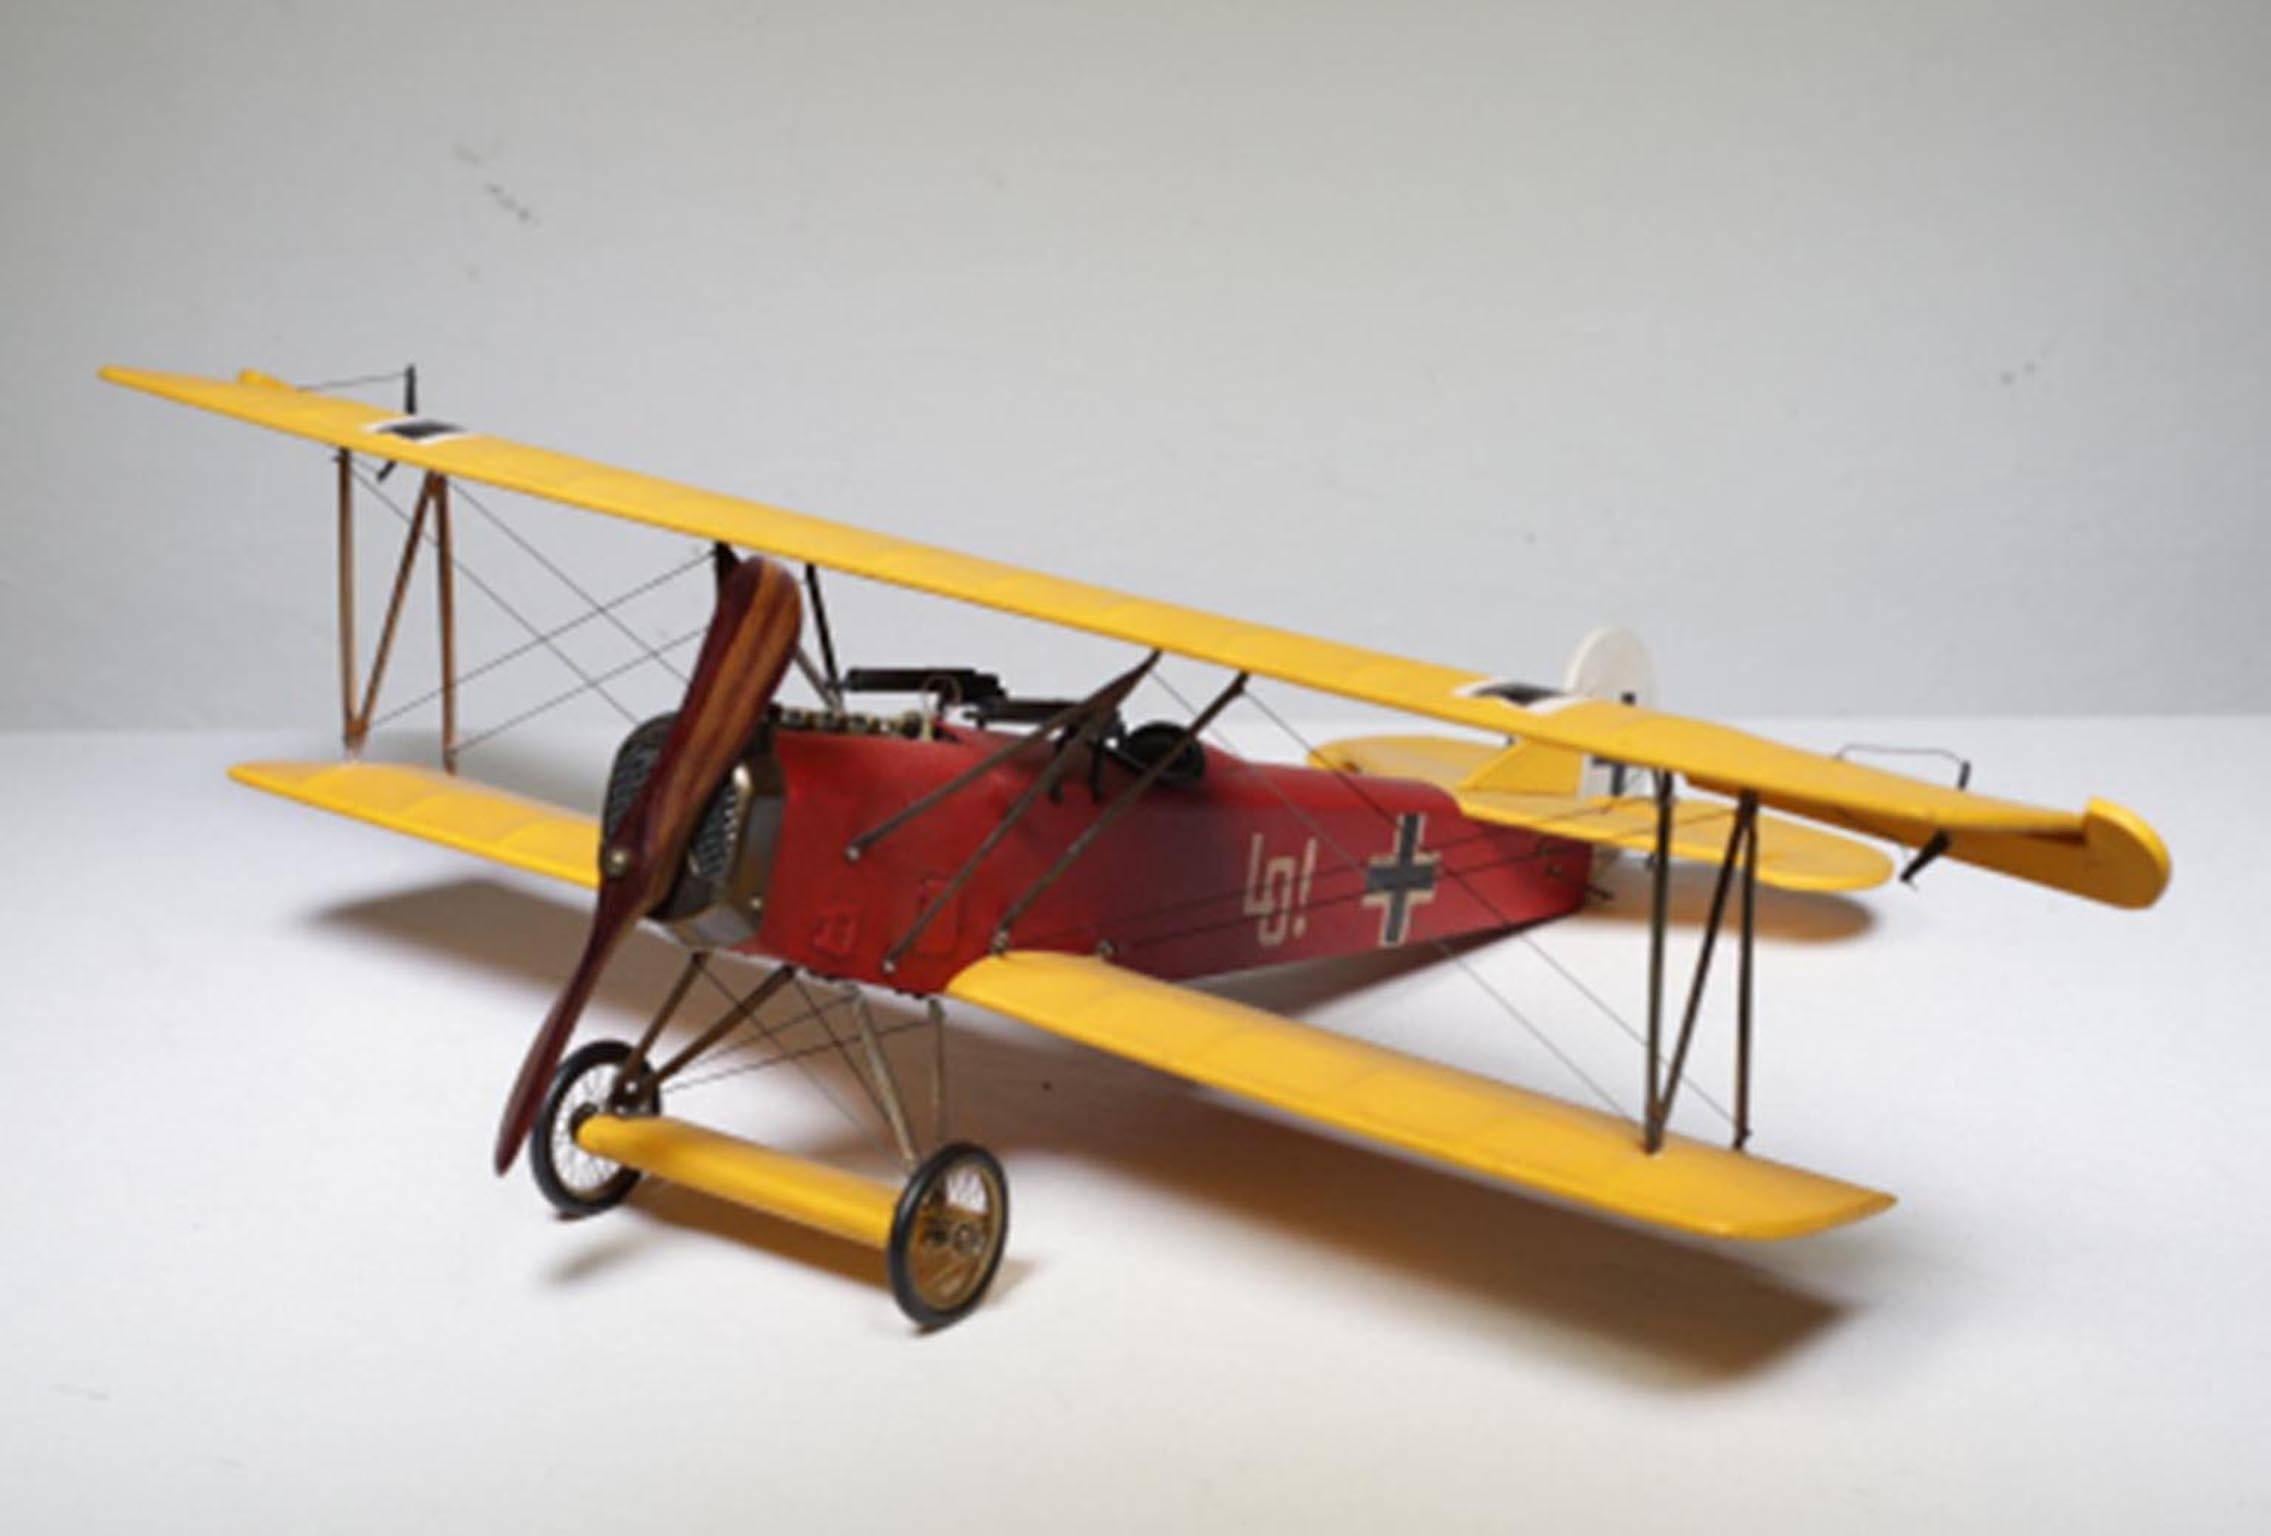 To scale model of an actual bi-plane with fabric wings, cloth seat, wooden propeller and detailed metal engine.
Fokker DVII - Germany's best aircraft of WW1.